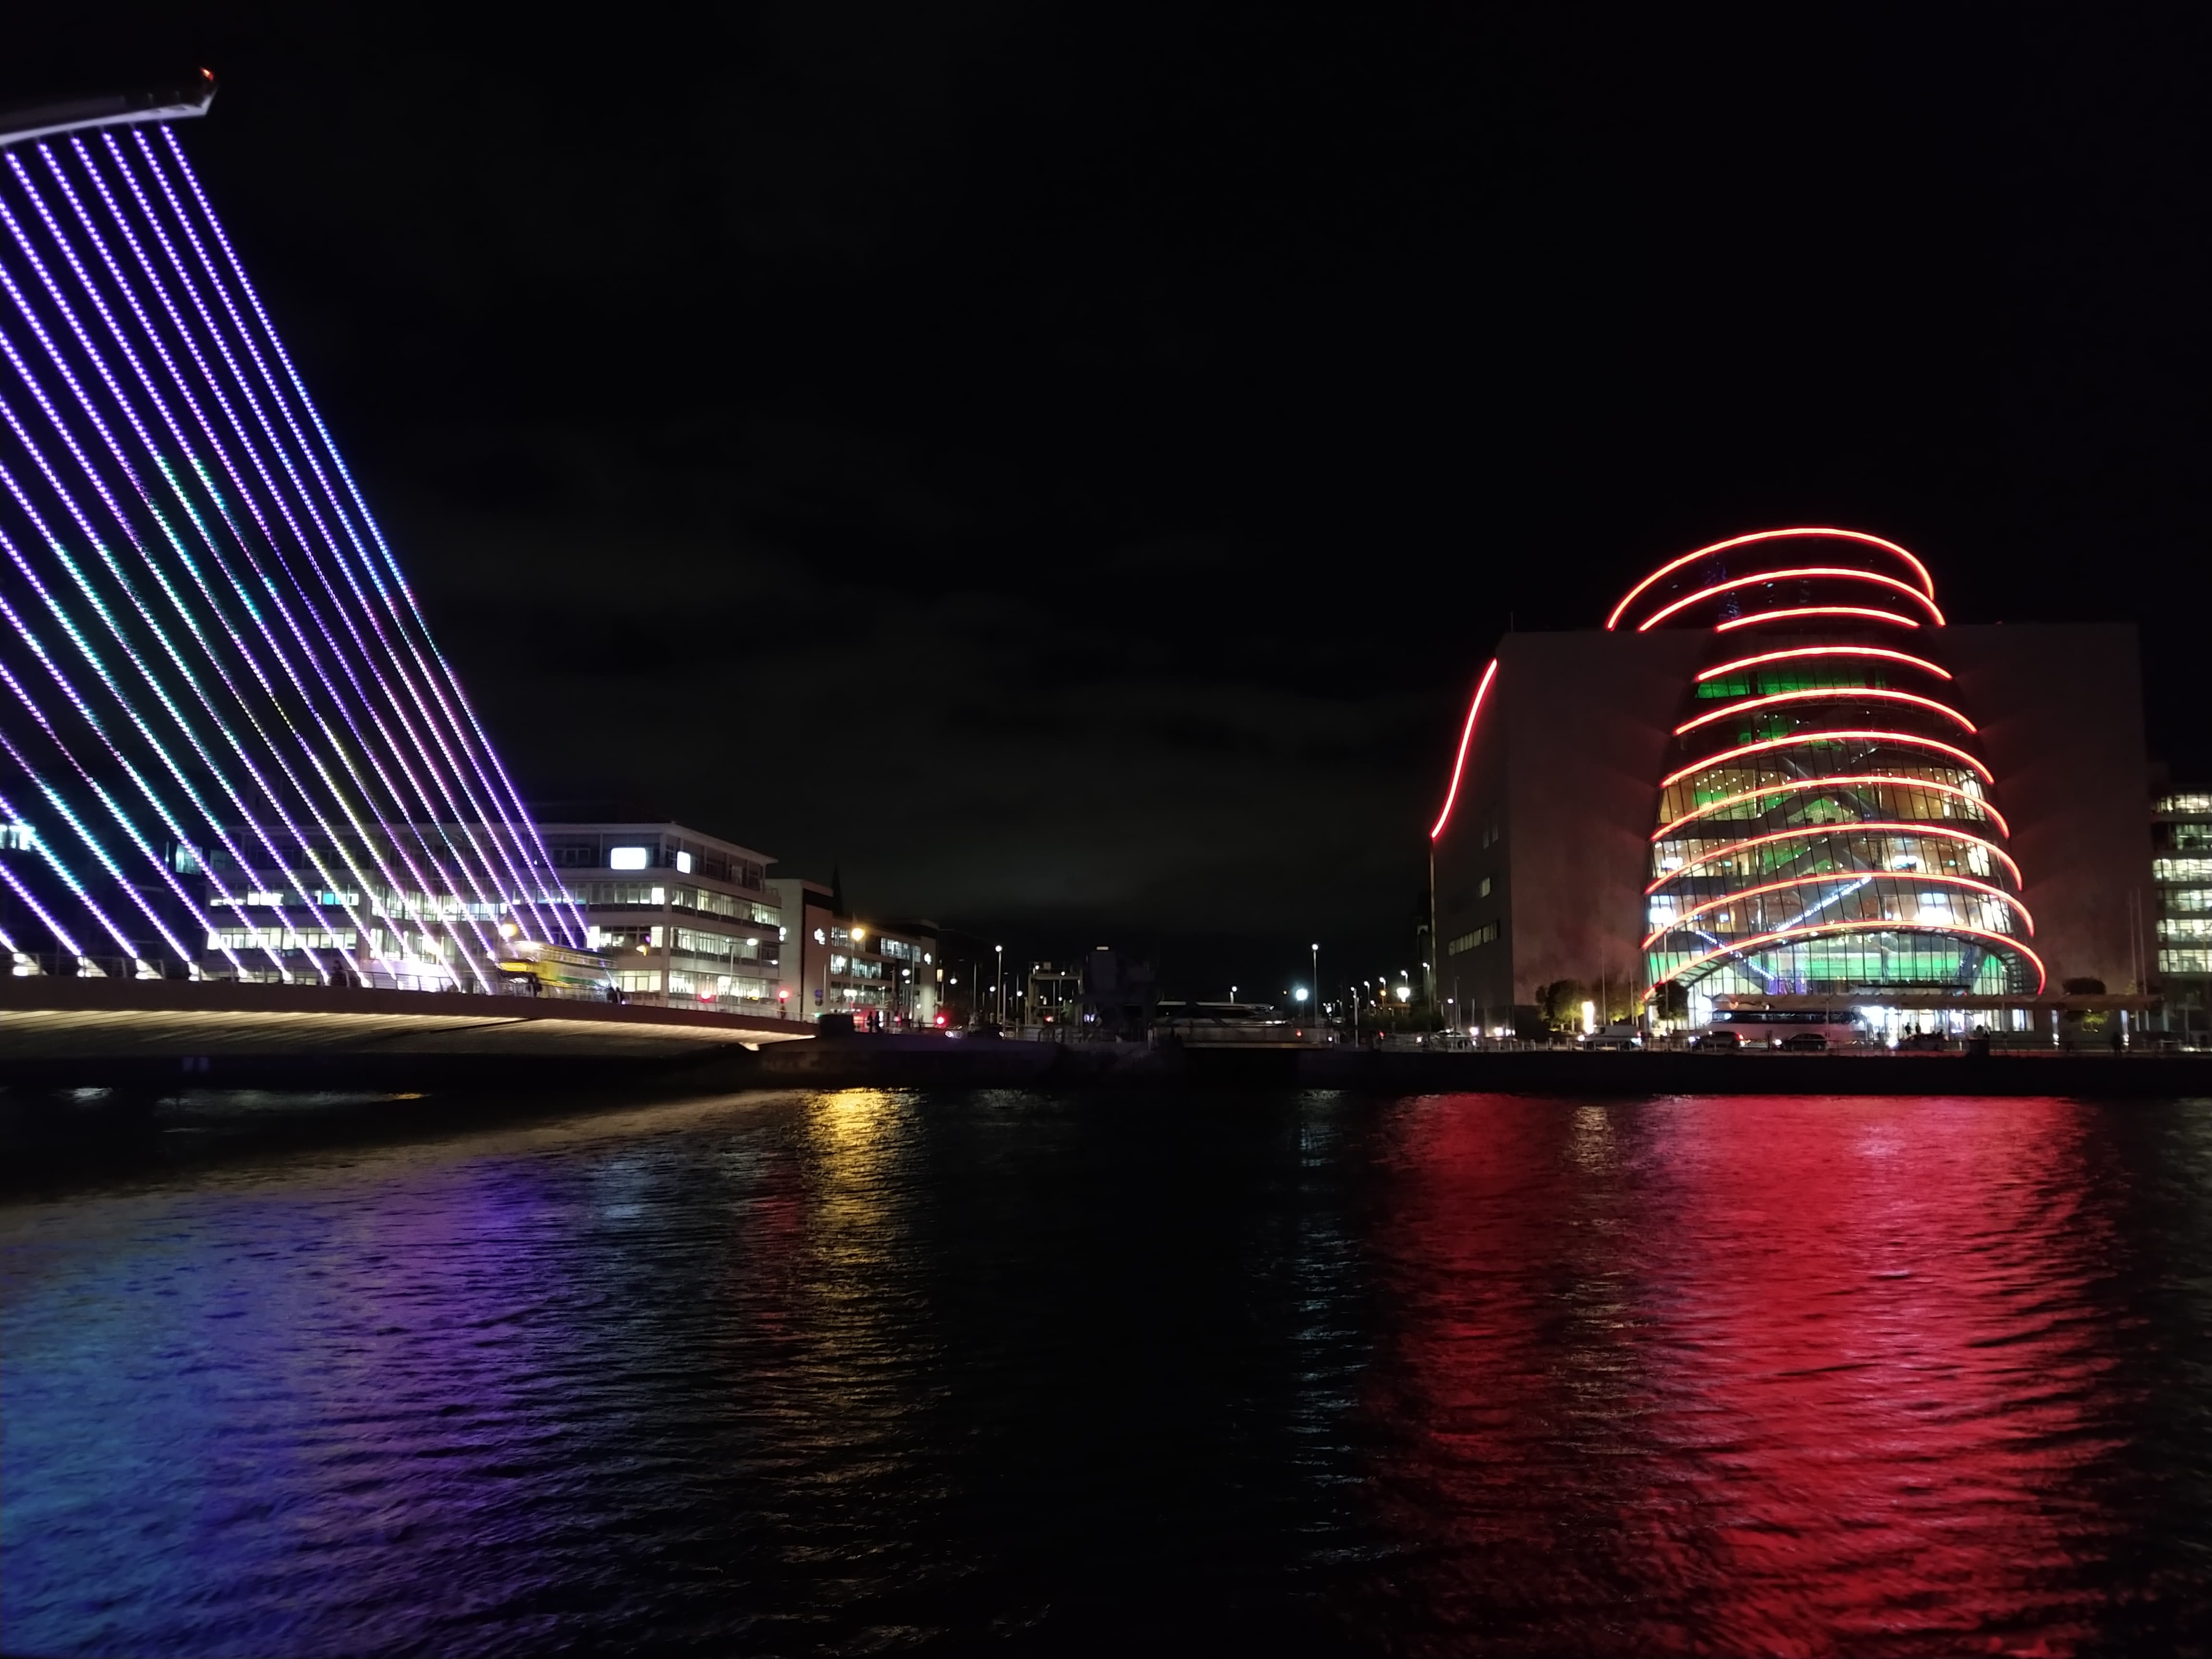 View of the Convention Centre Dublin across the River Liffey